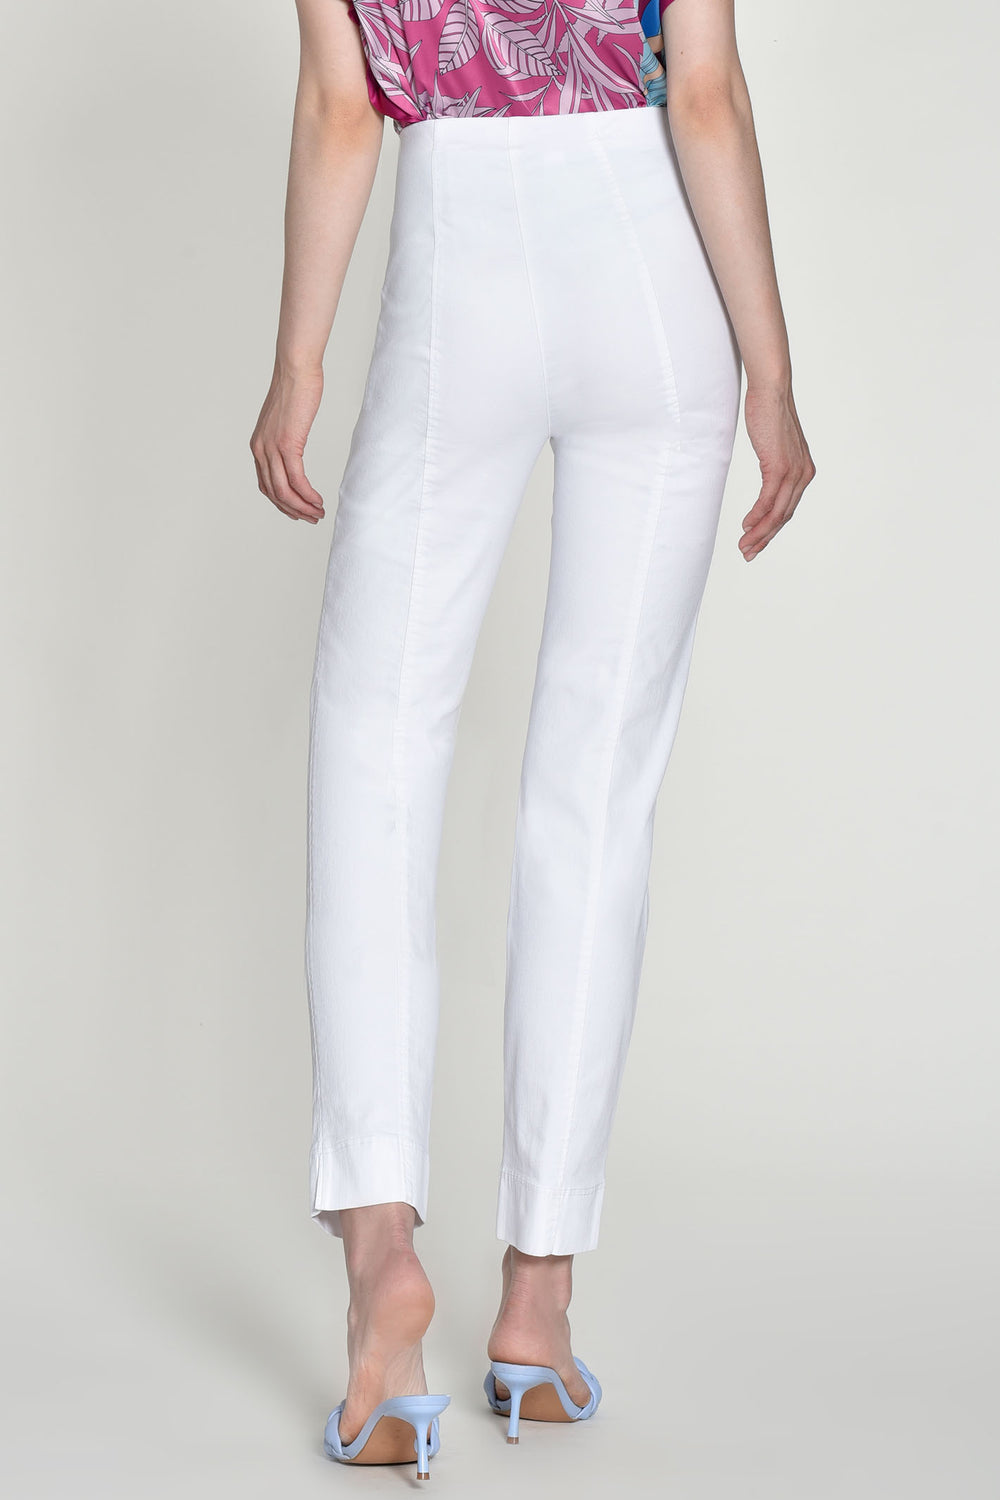 Robell 51639 5448 10 Marie White Trousers 78cm - Experience Boutique